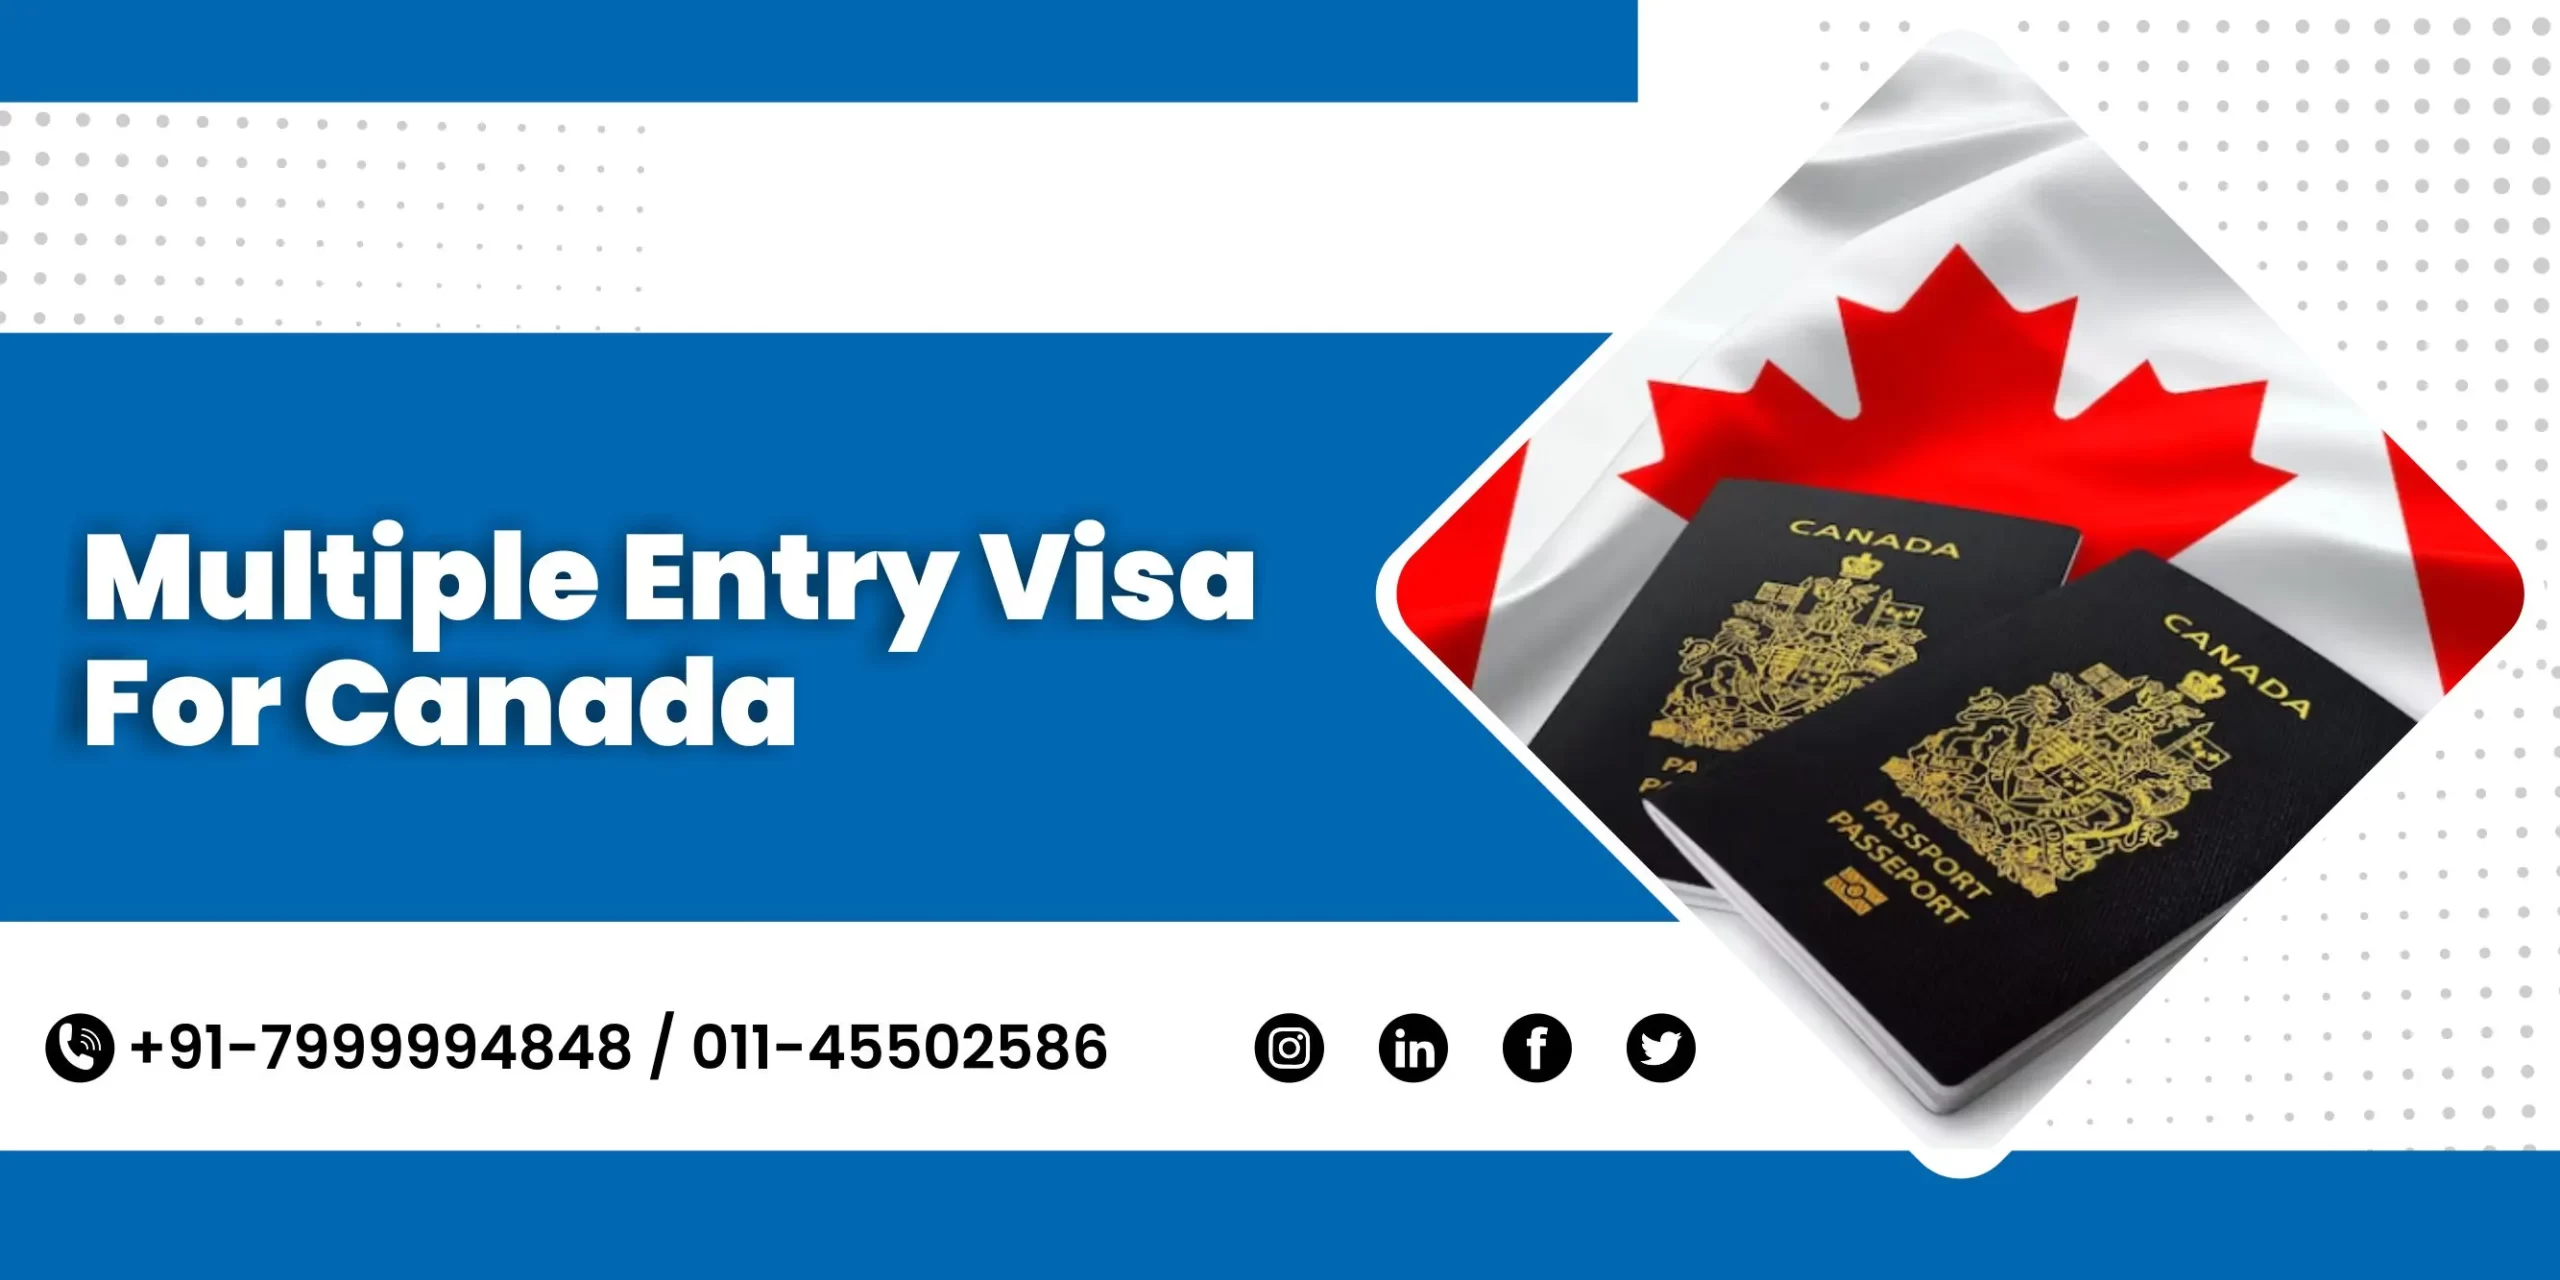 Multiple Entry Visa for Canada